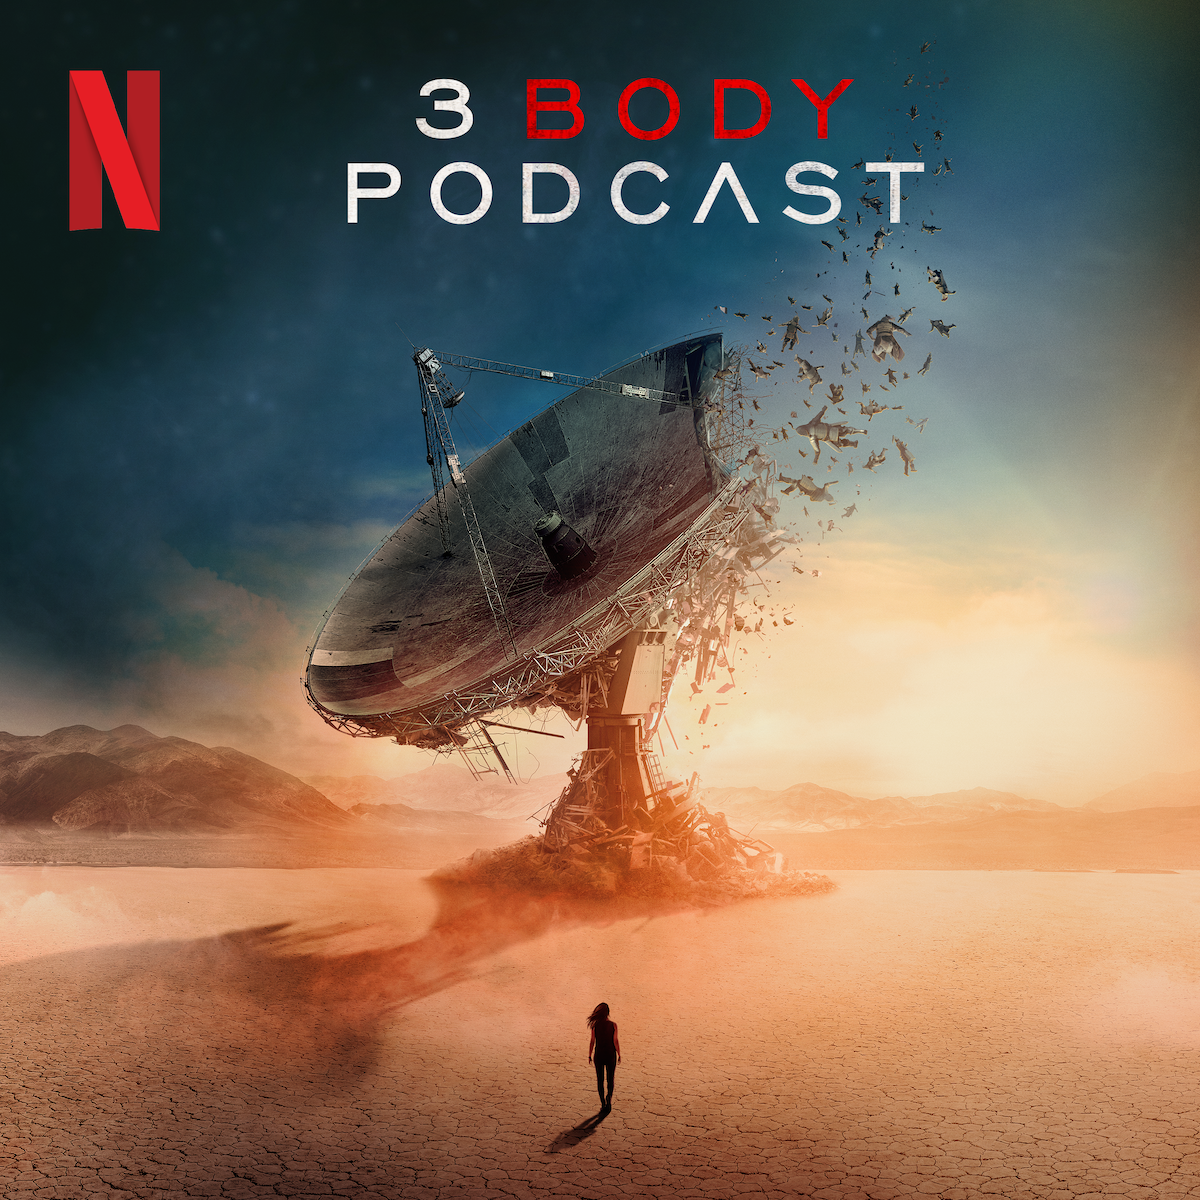 3 Body Podcast key art. A view of a crumbling radio telescope as a woman walks toward it.